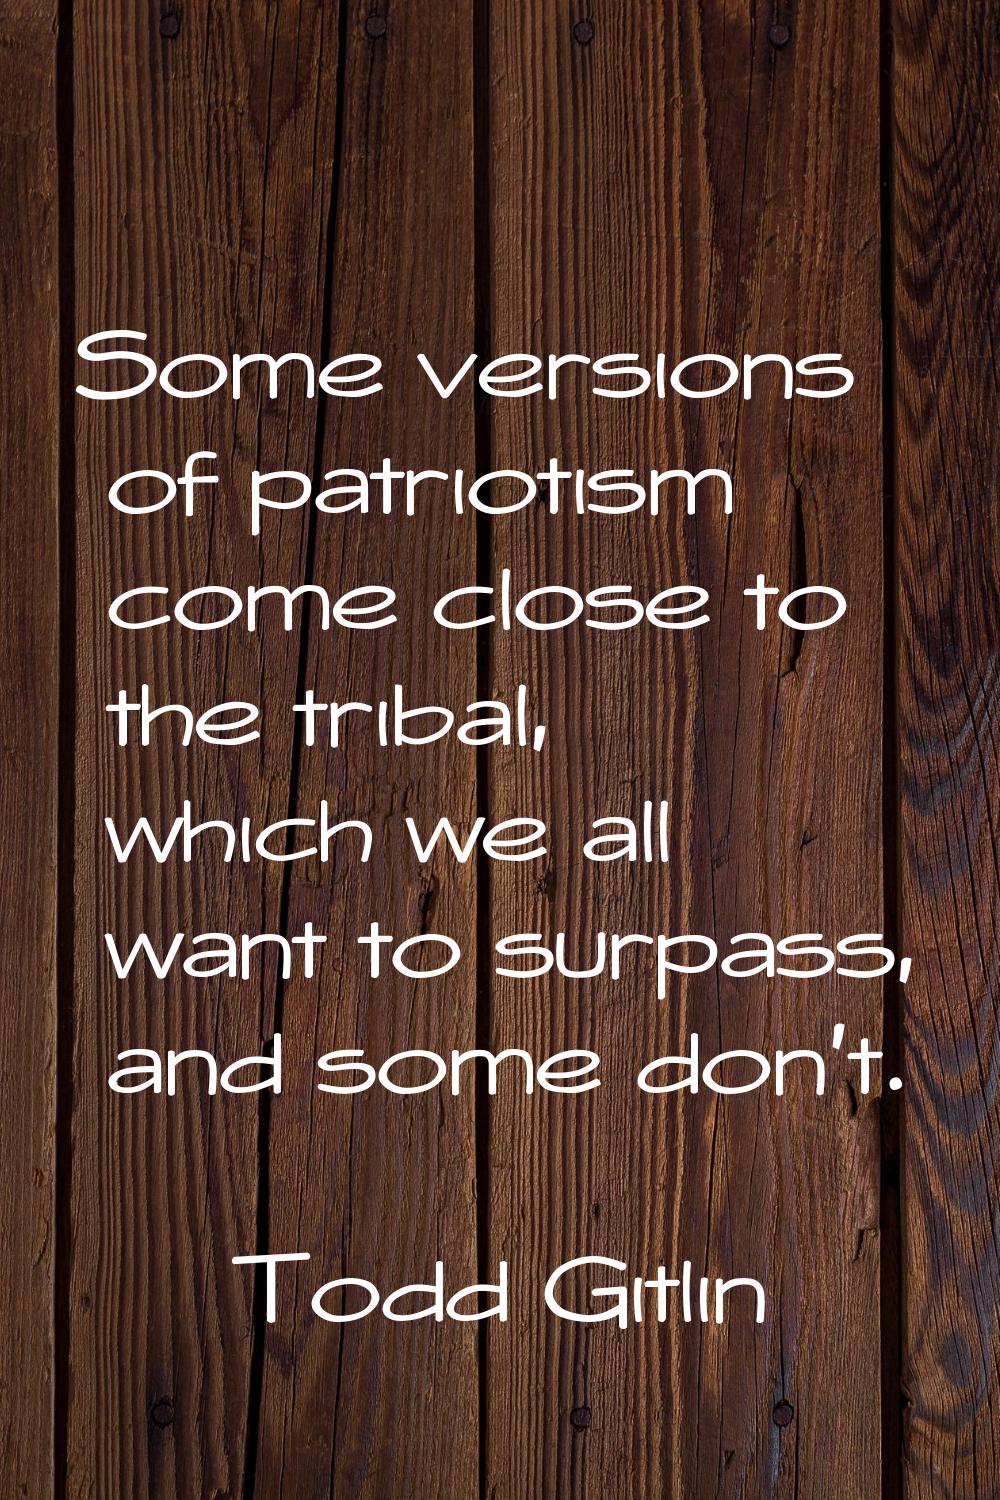 Some versions of patriotism come close to the tribal, which we all want to surpass, and some don't.